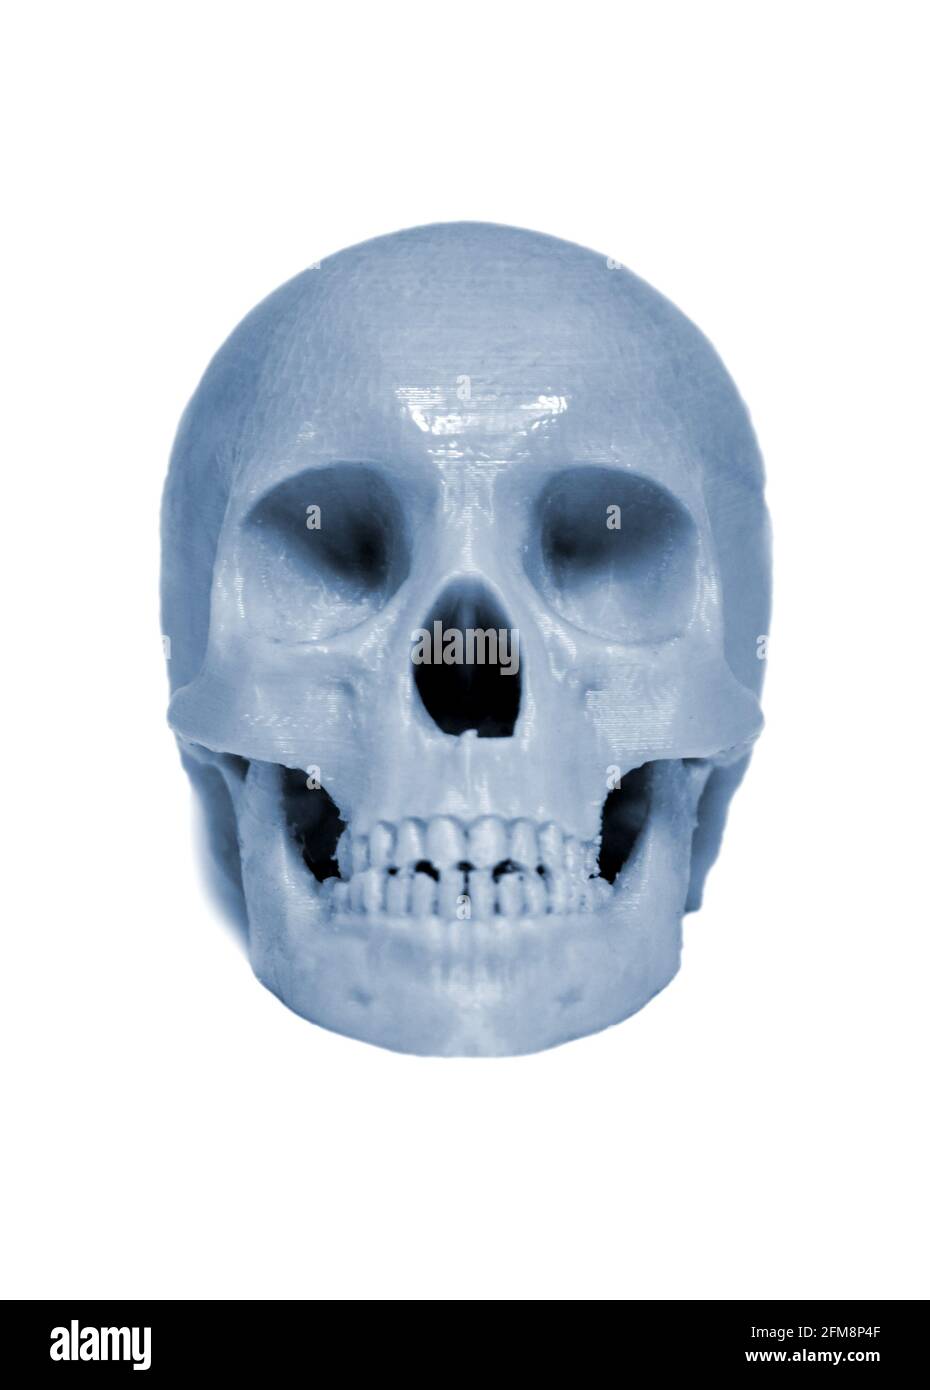 Skull printed with plastic of gray color on a 3d printer. Stock Photo